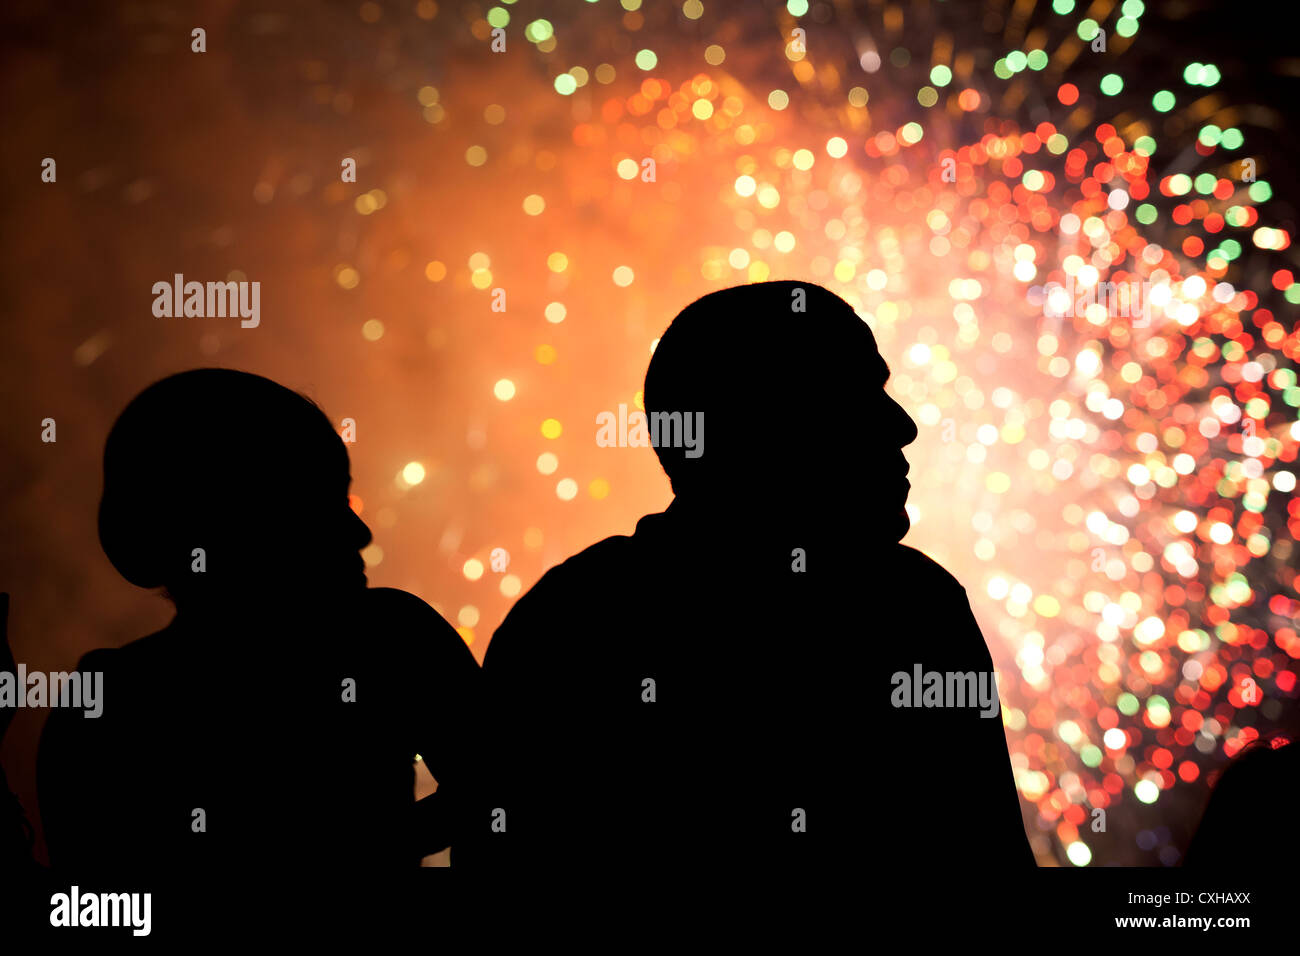 US President Barack Obama and First Lady Michelle Obama watch fireworks July 4, 2011 from the roof of the White House. Stock Photo